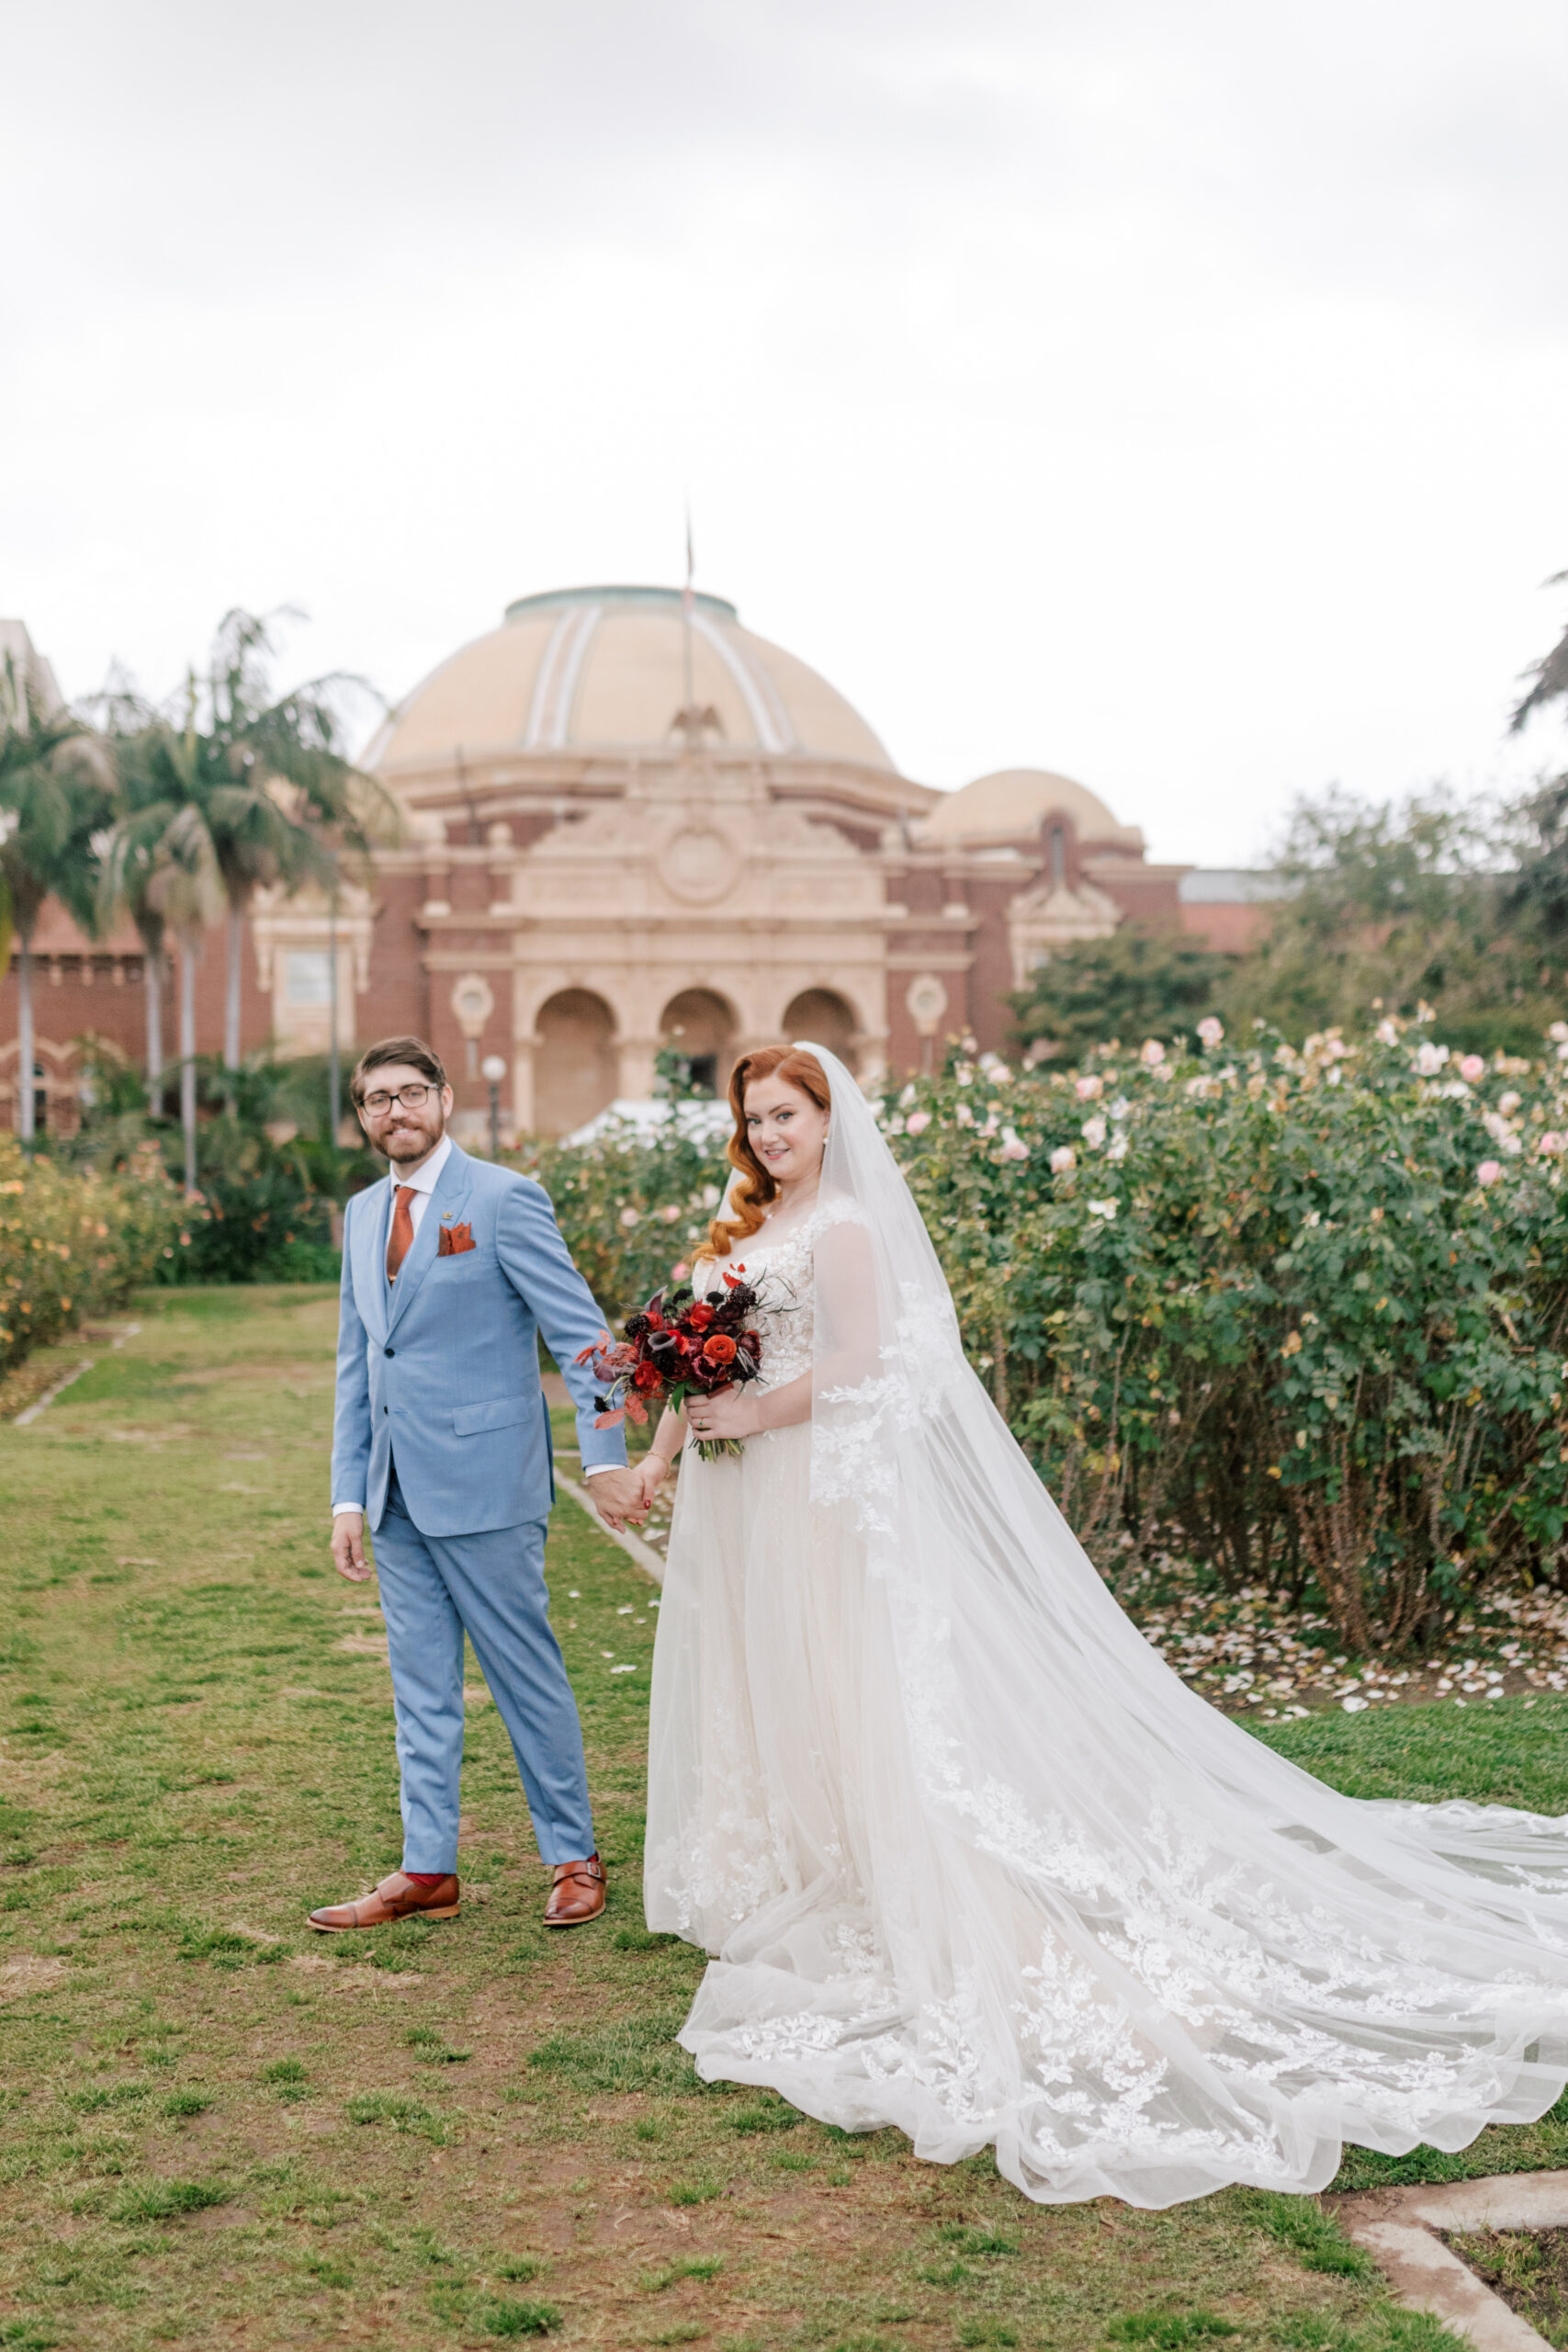 Bride and groom walking through a rose garden | Image by Hope Helmuth Photography